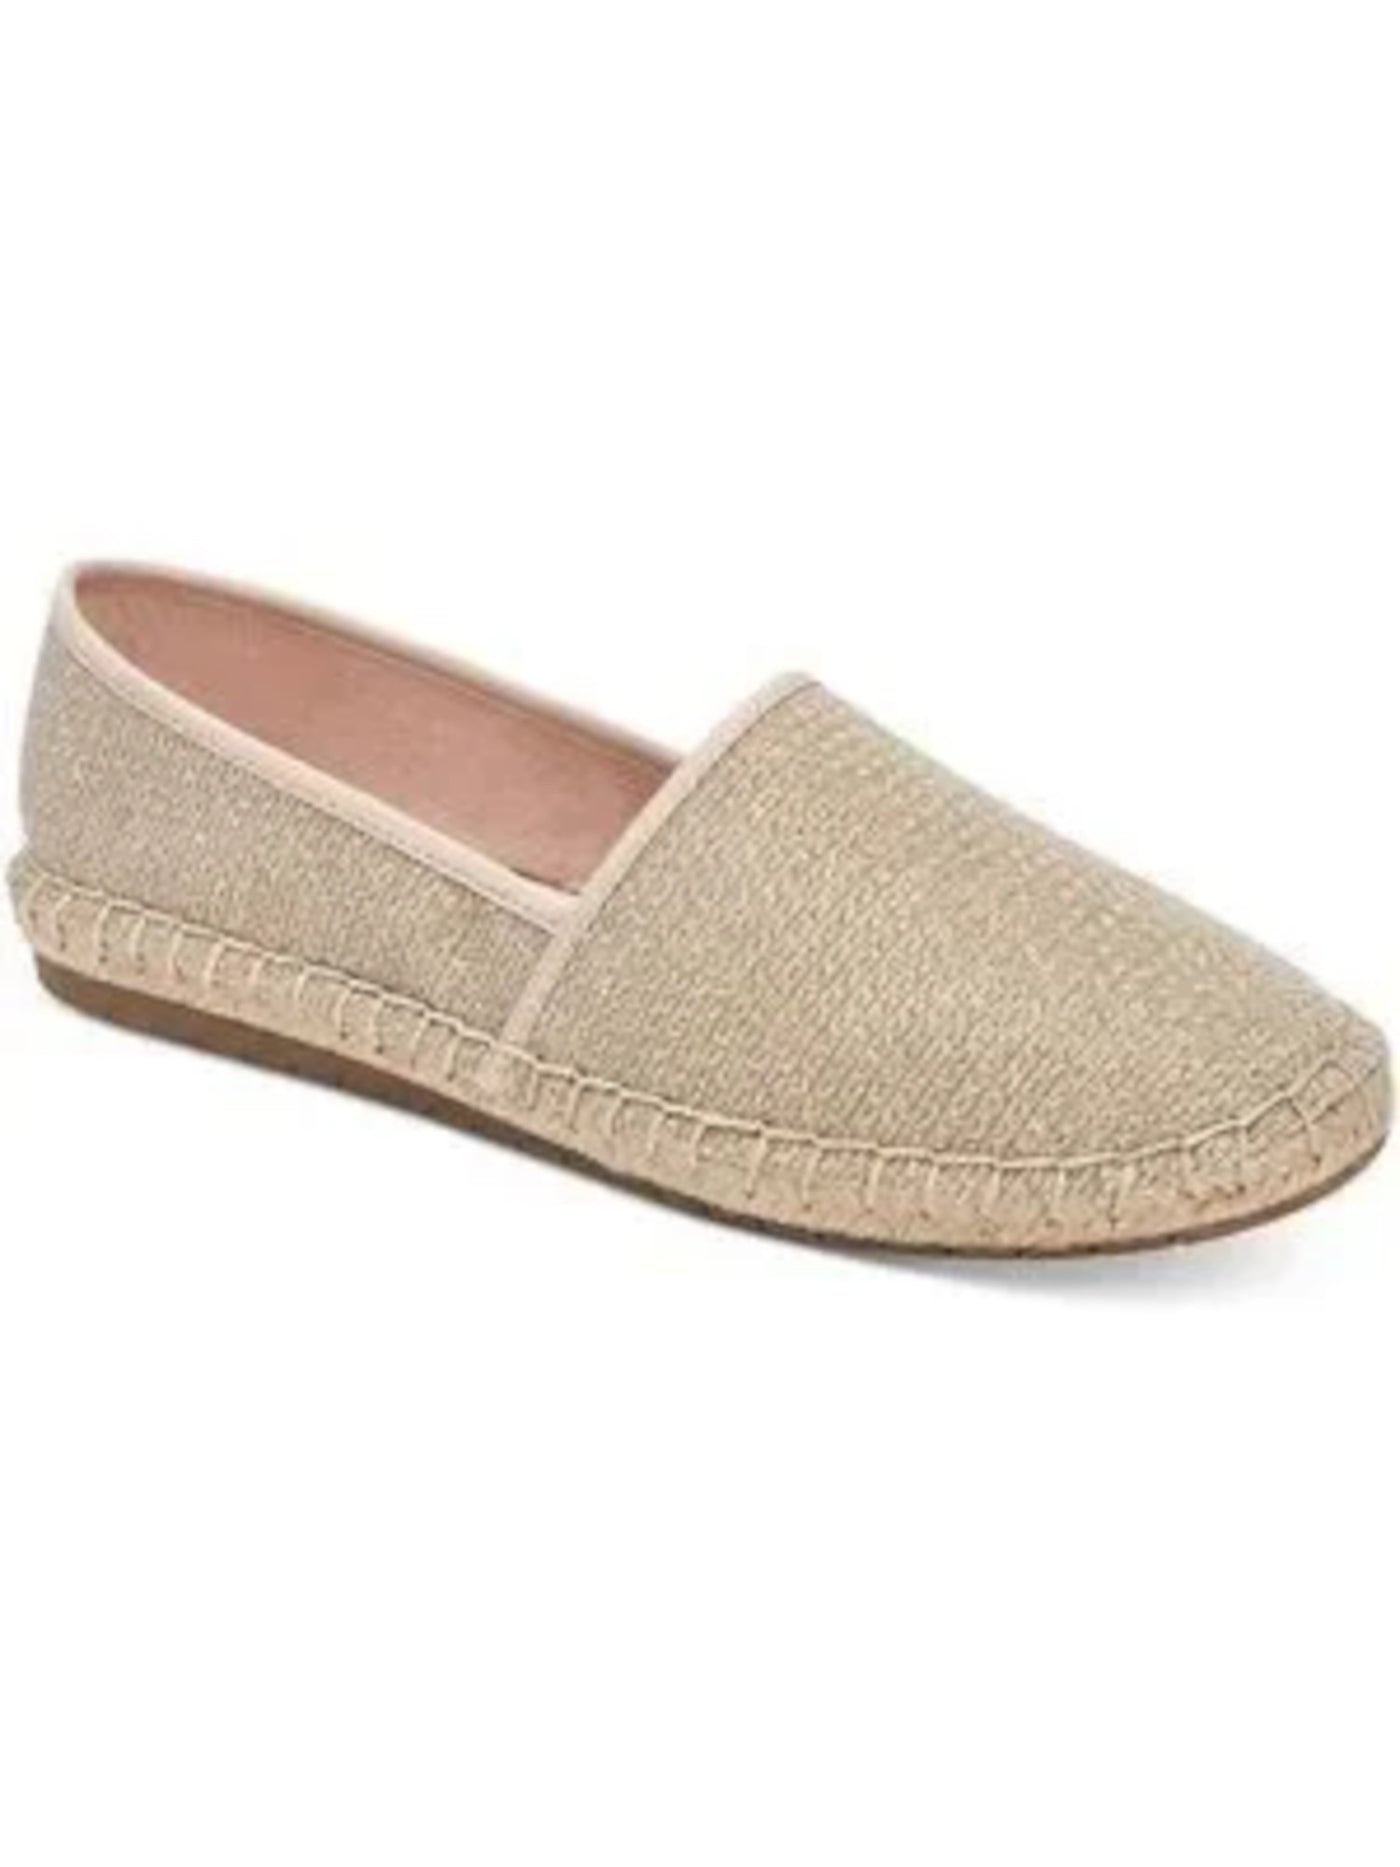 CHARTER CLUB Womens Platino Gold Patterned Metallic Padded Joeey Round Toe Slip On Espadrille Shoes 5 M